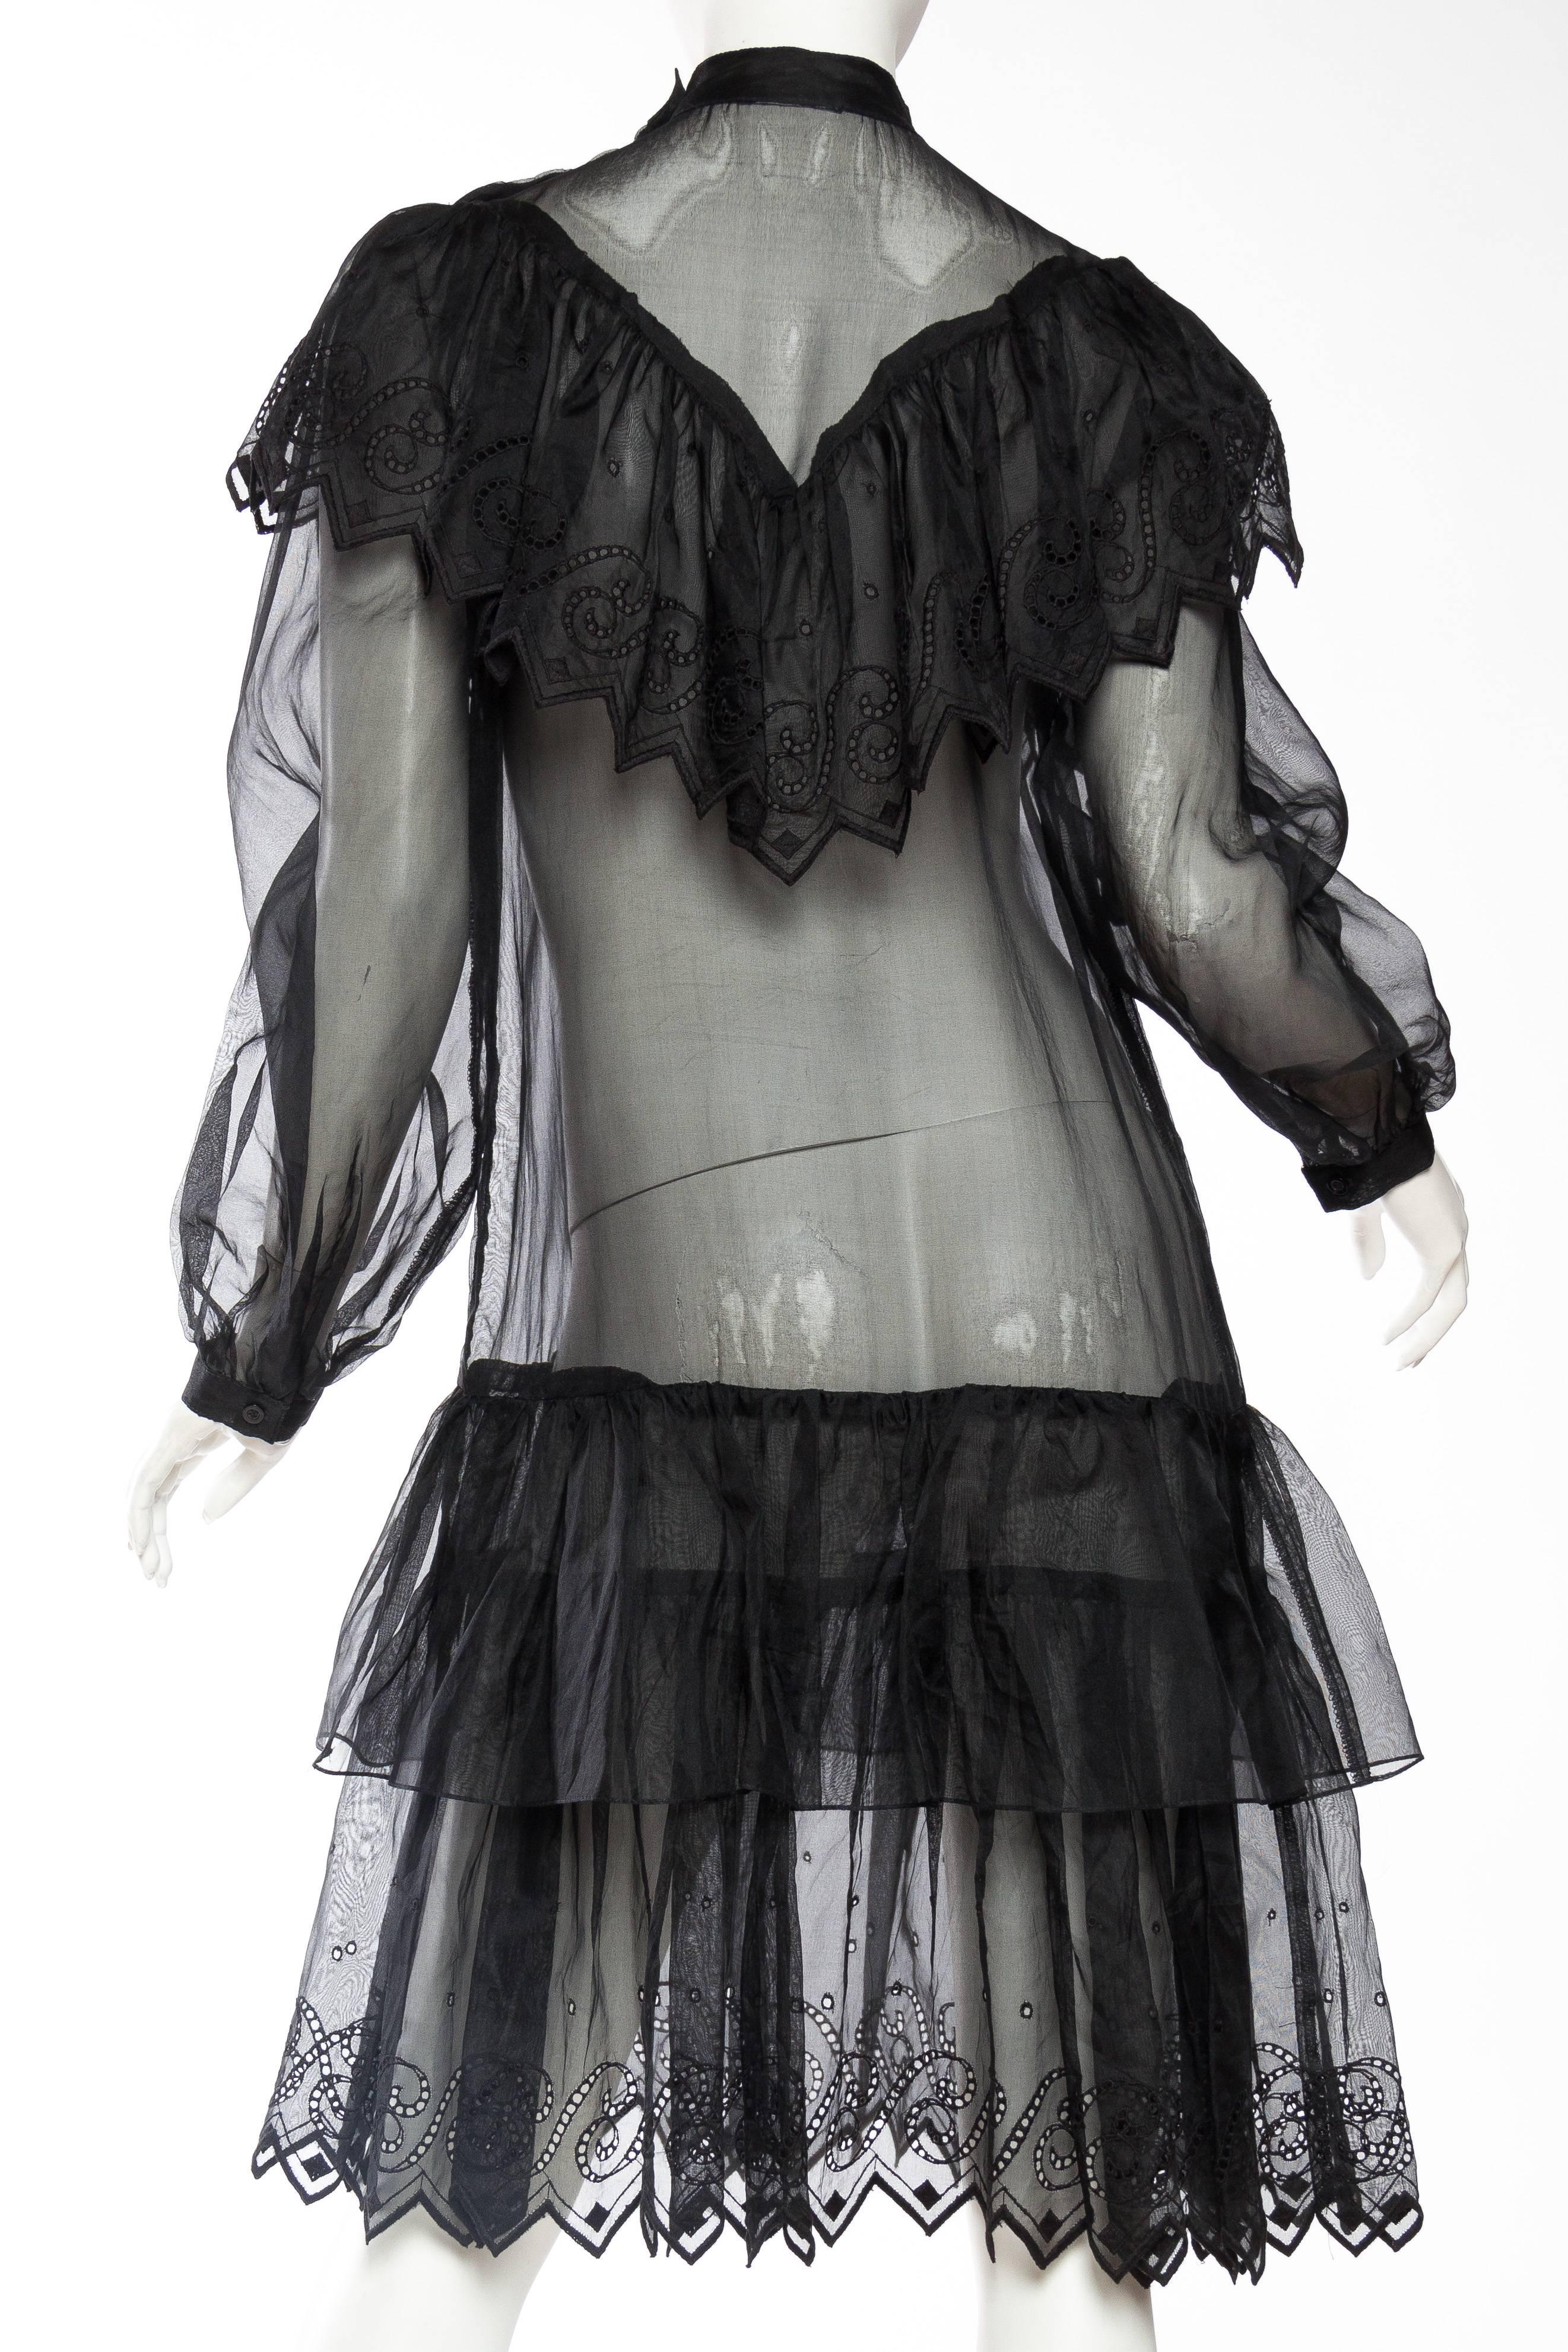 1970s Gucci Style Silk Organza Victorian Inspired Sheer Lace Dress 1